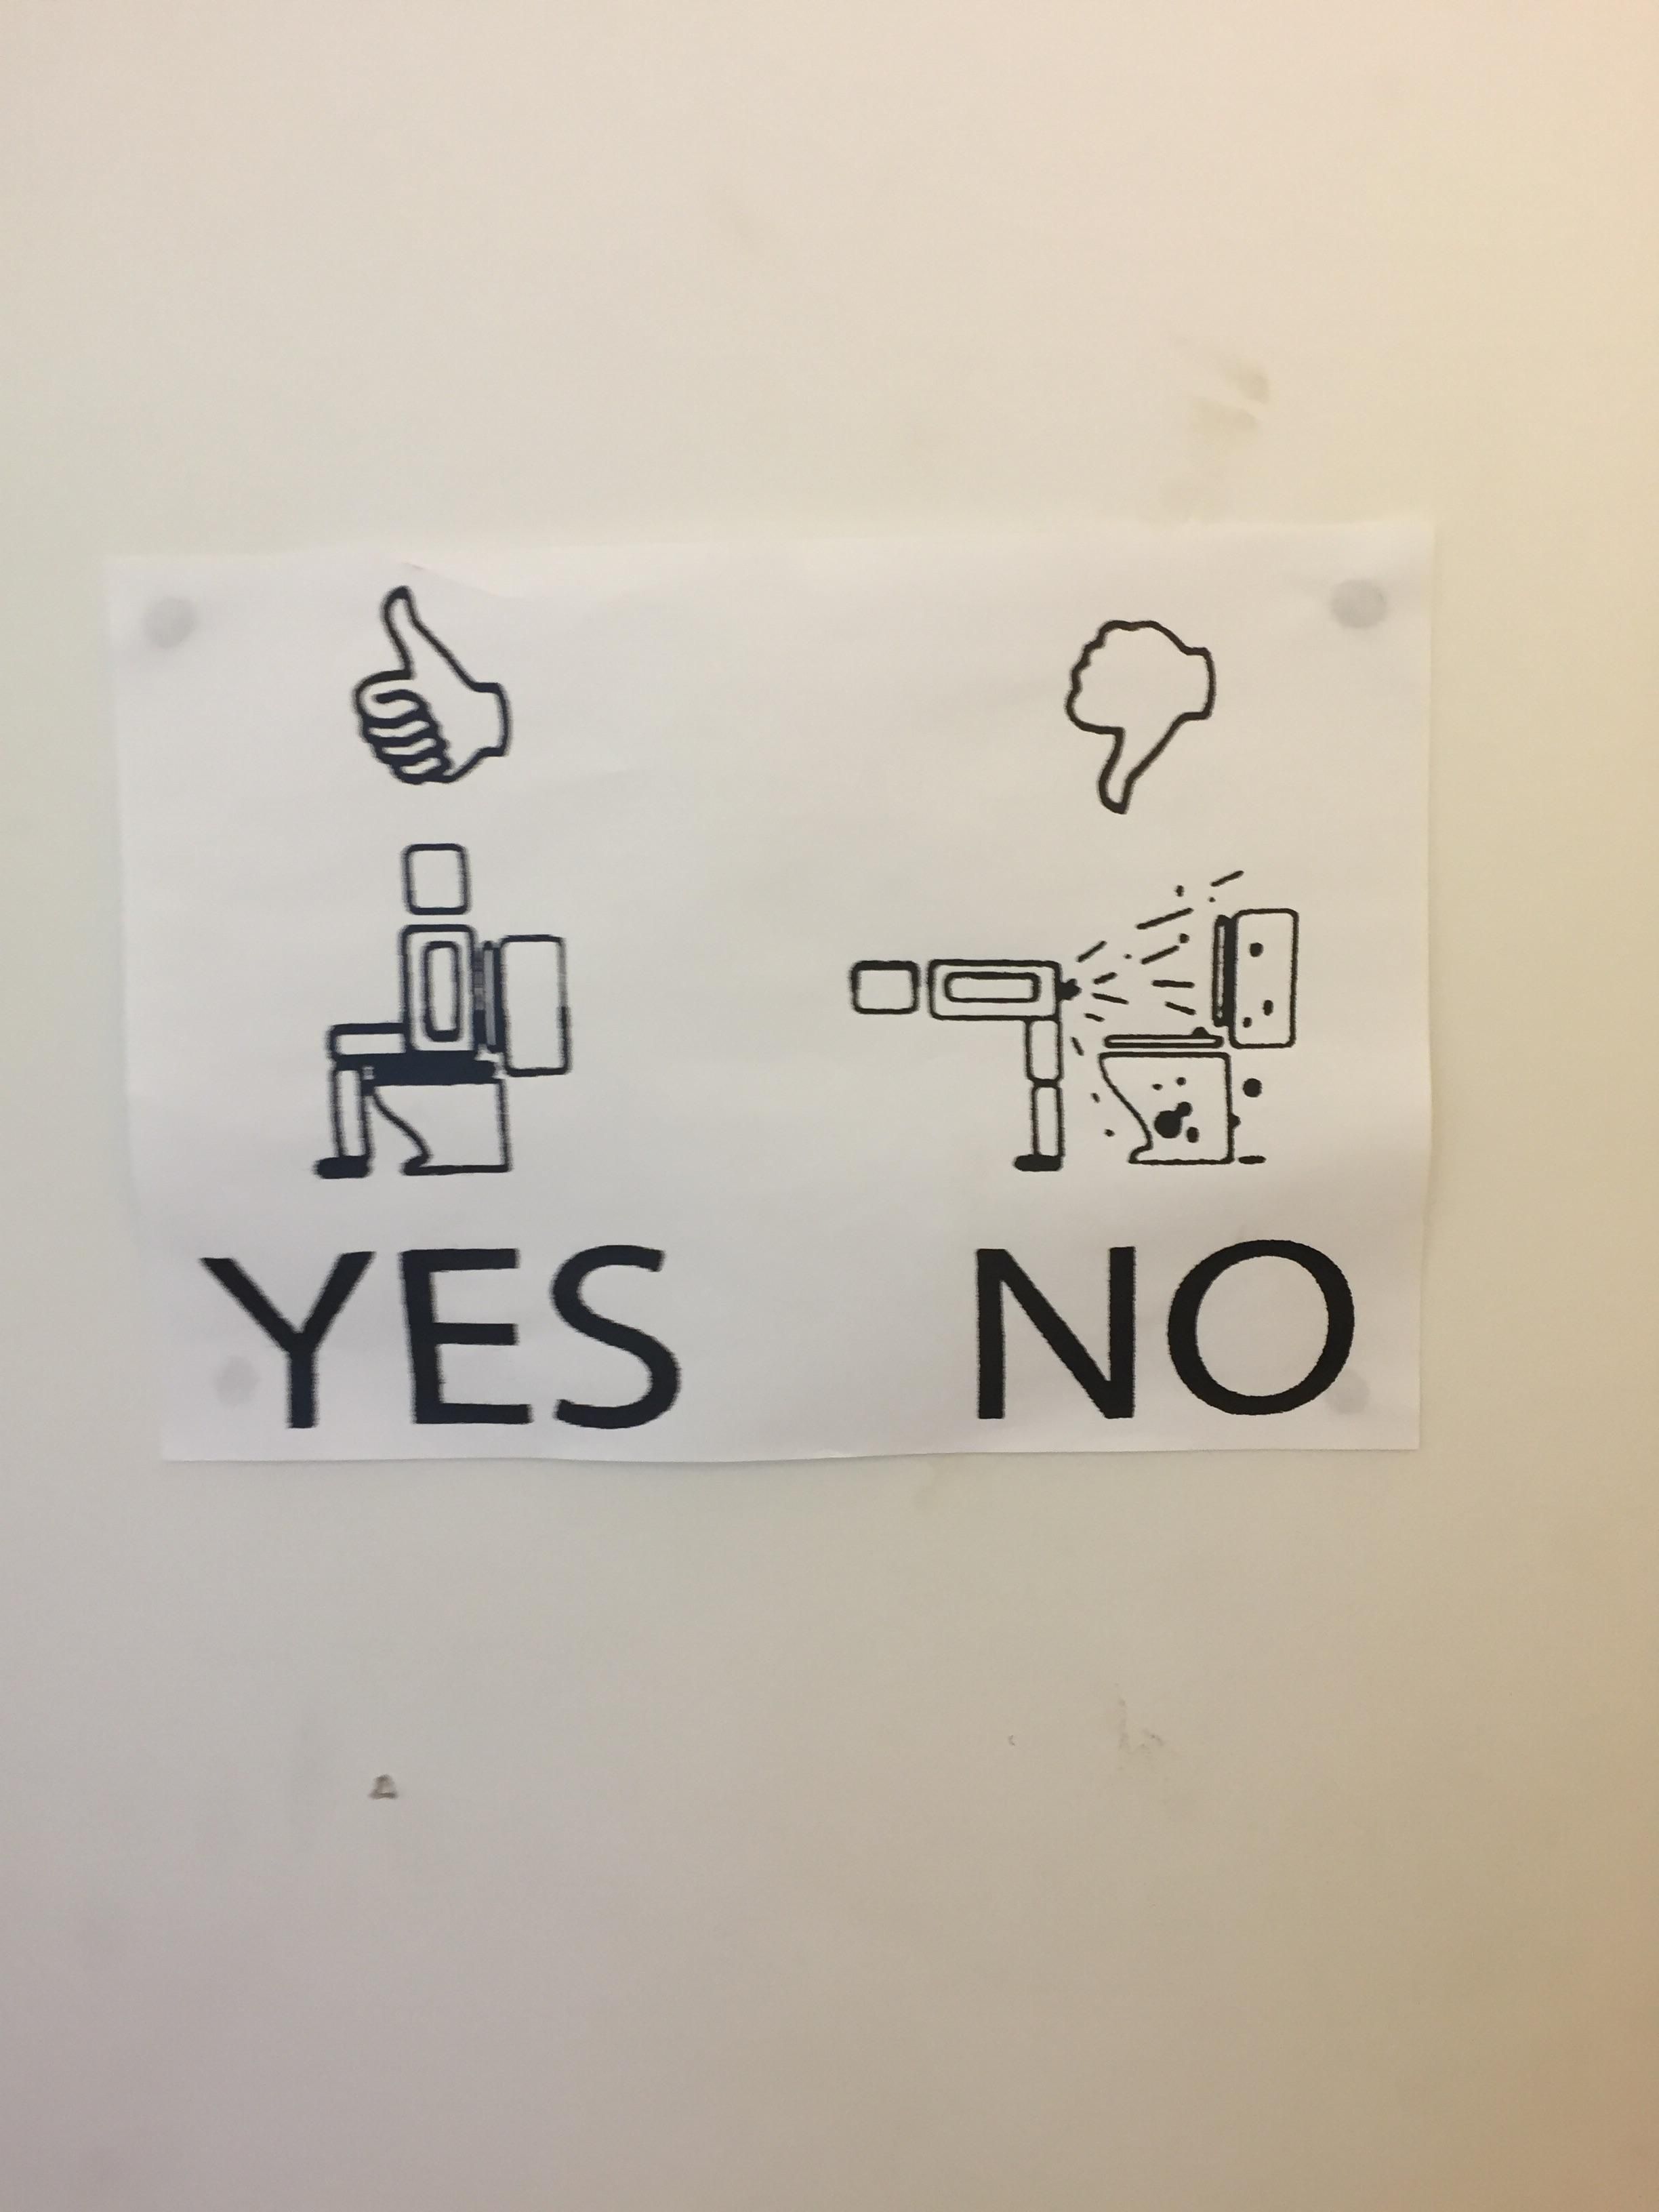 This sign in the toilet area of the construction site I'm working at.